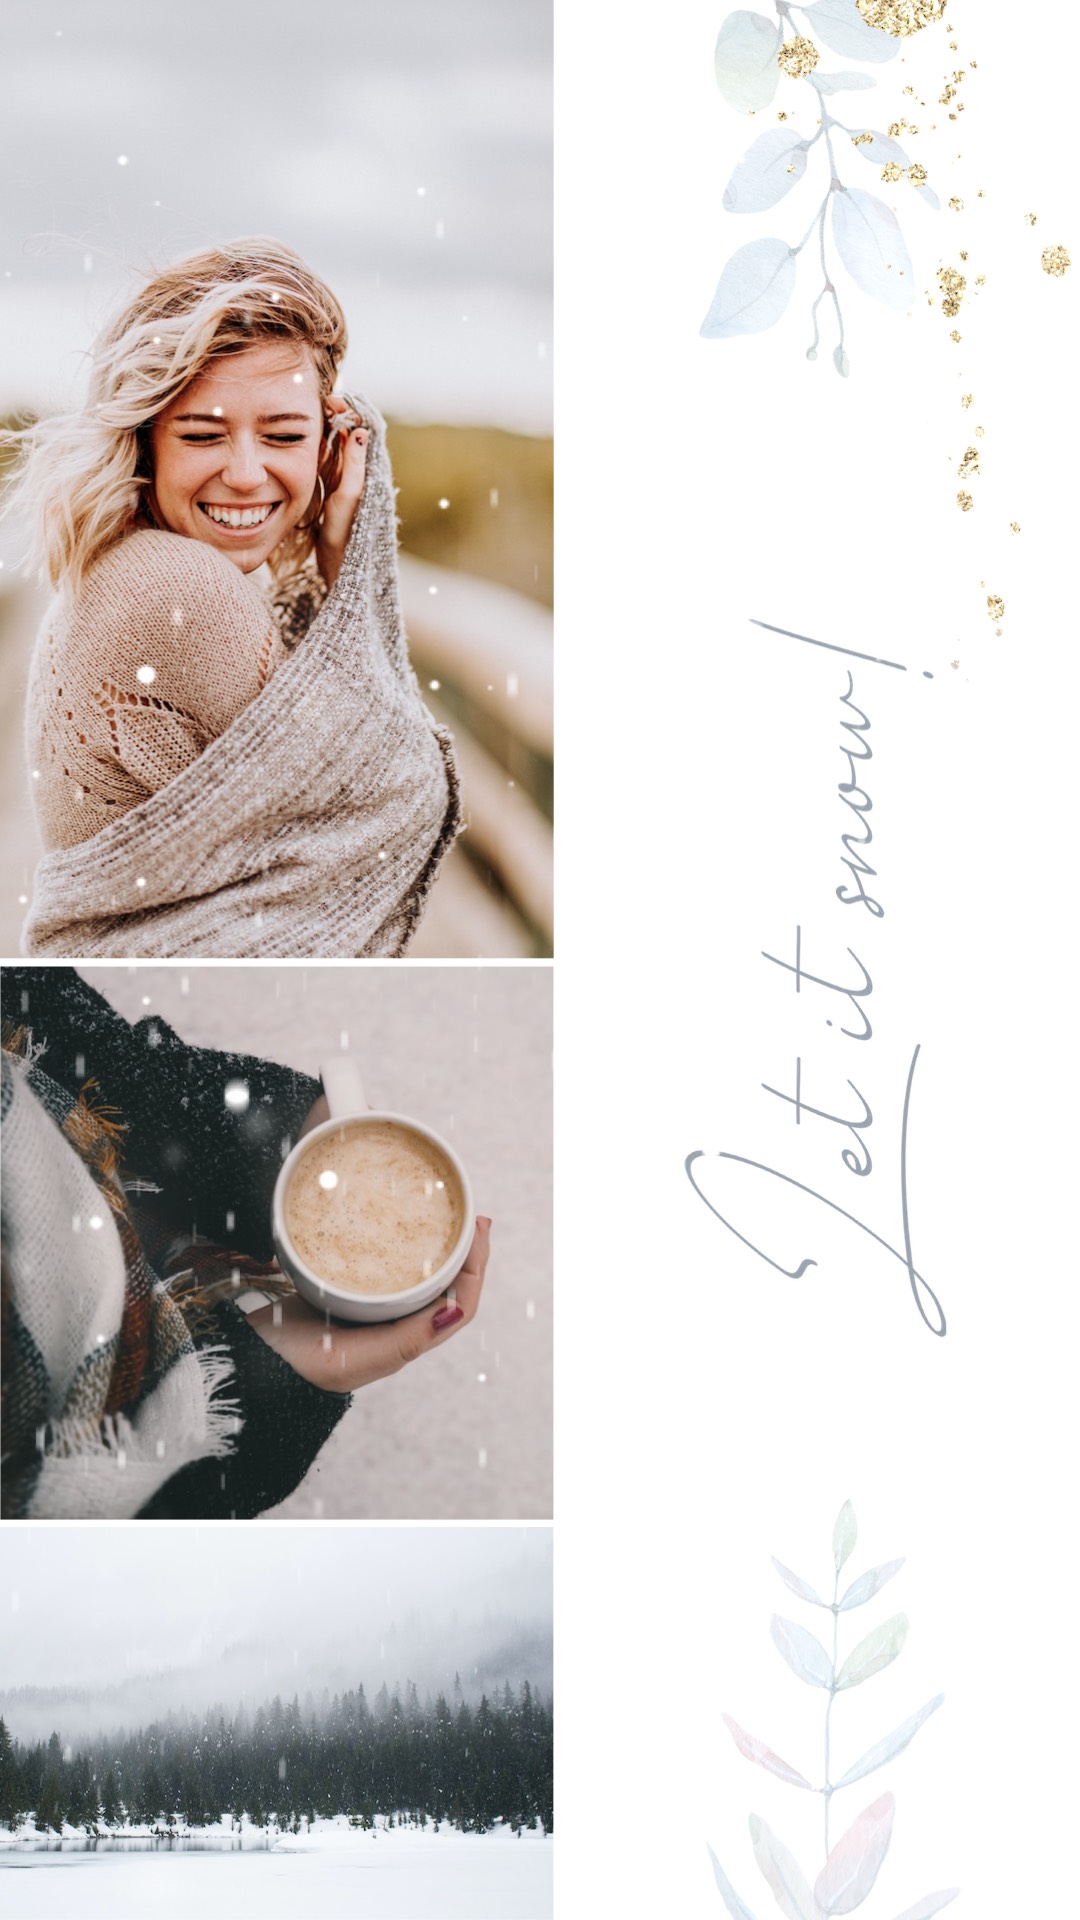 Let it snow! Woman drinking a coffee while it snows Winter Story template